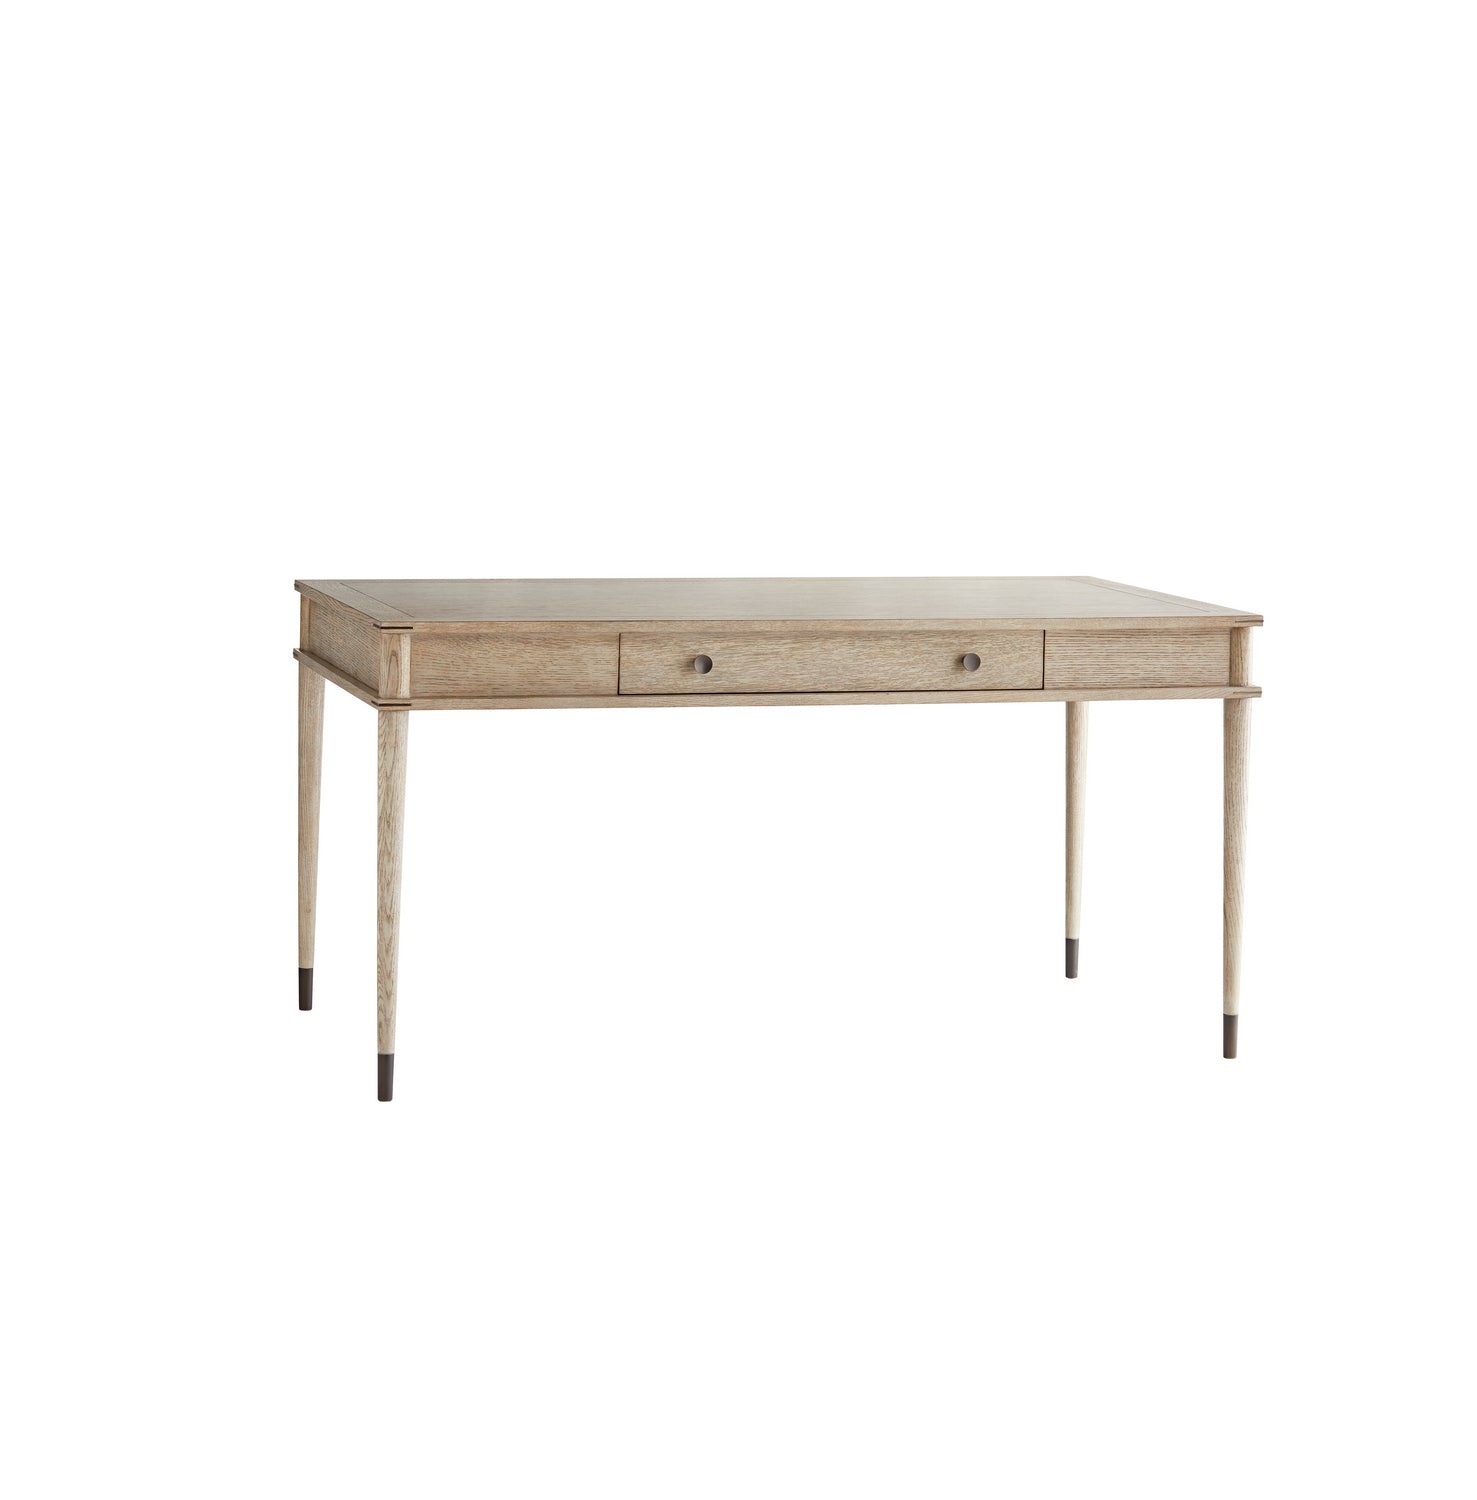 Desk from the Jobe collection in Smoke finish